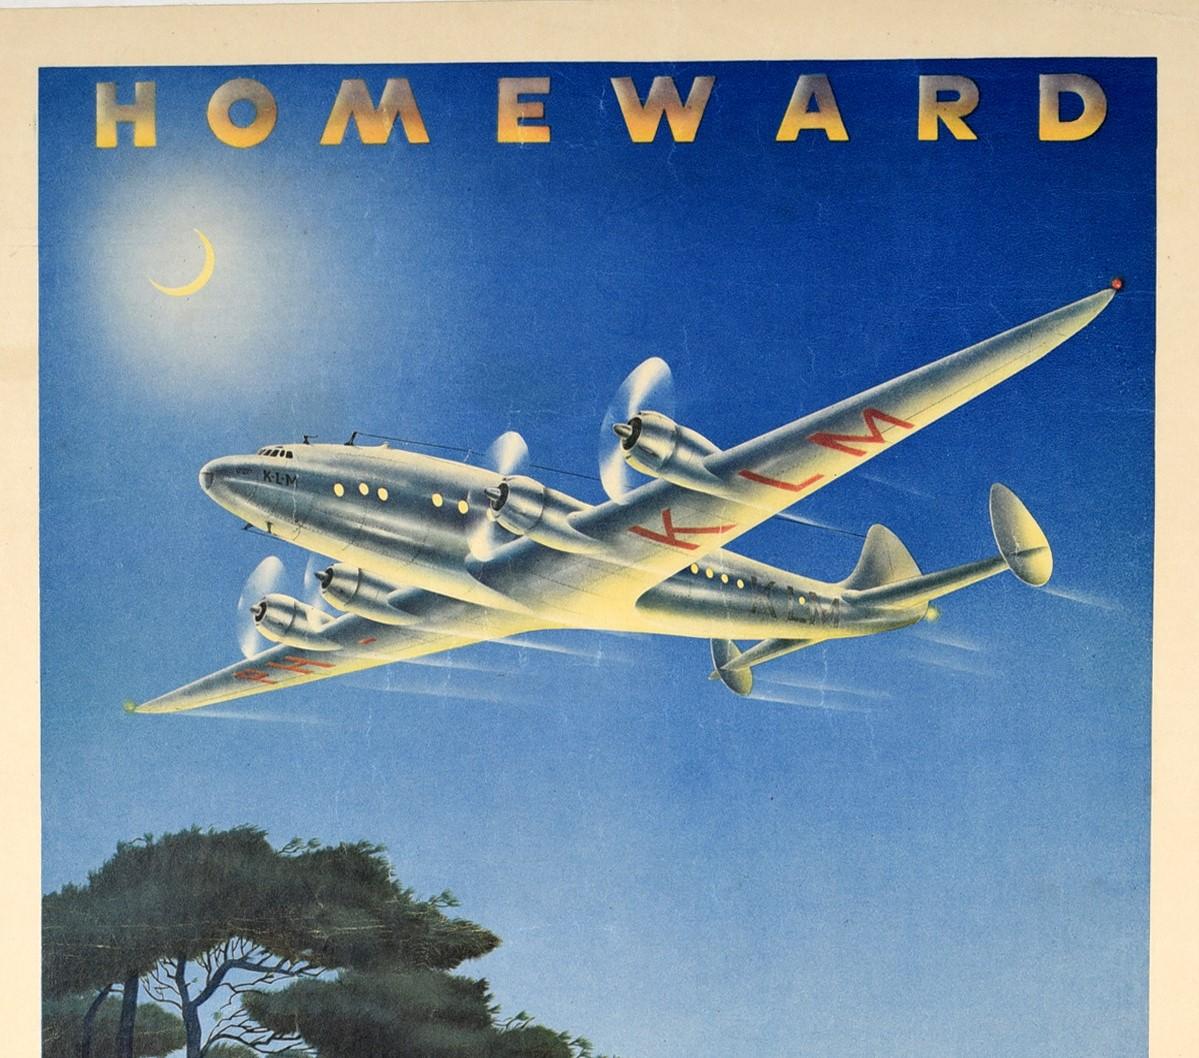 Original vintage travel advertising poster issued by KLM Royal Dutch Airlines - Homeward - featuring great artwork by Paul Erkelens (b. 1912) of a KLM propeller plane flying at speed in a blue evening sky above a tree in the foreground with